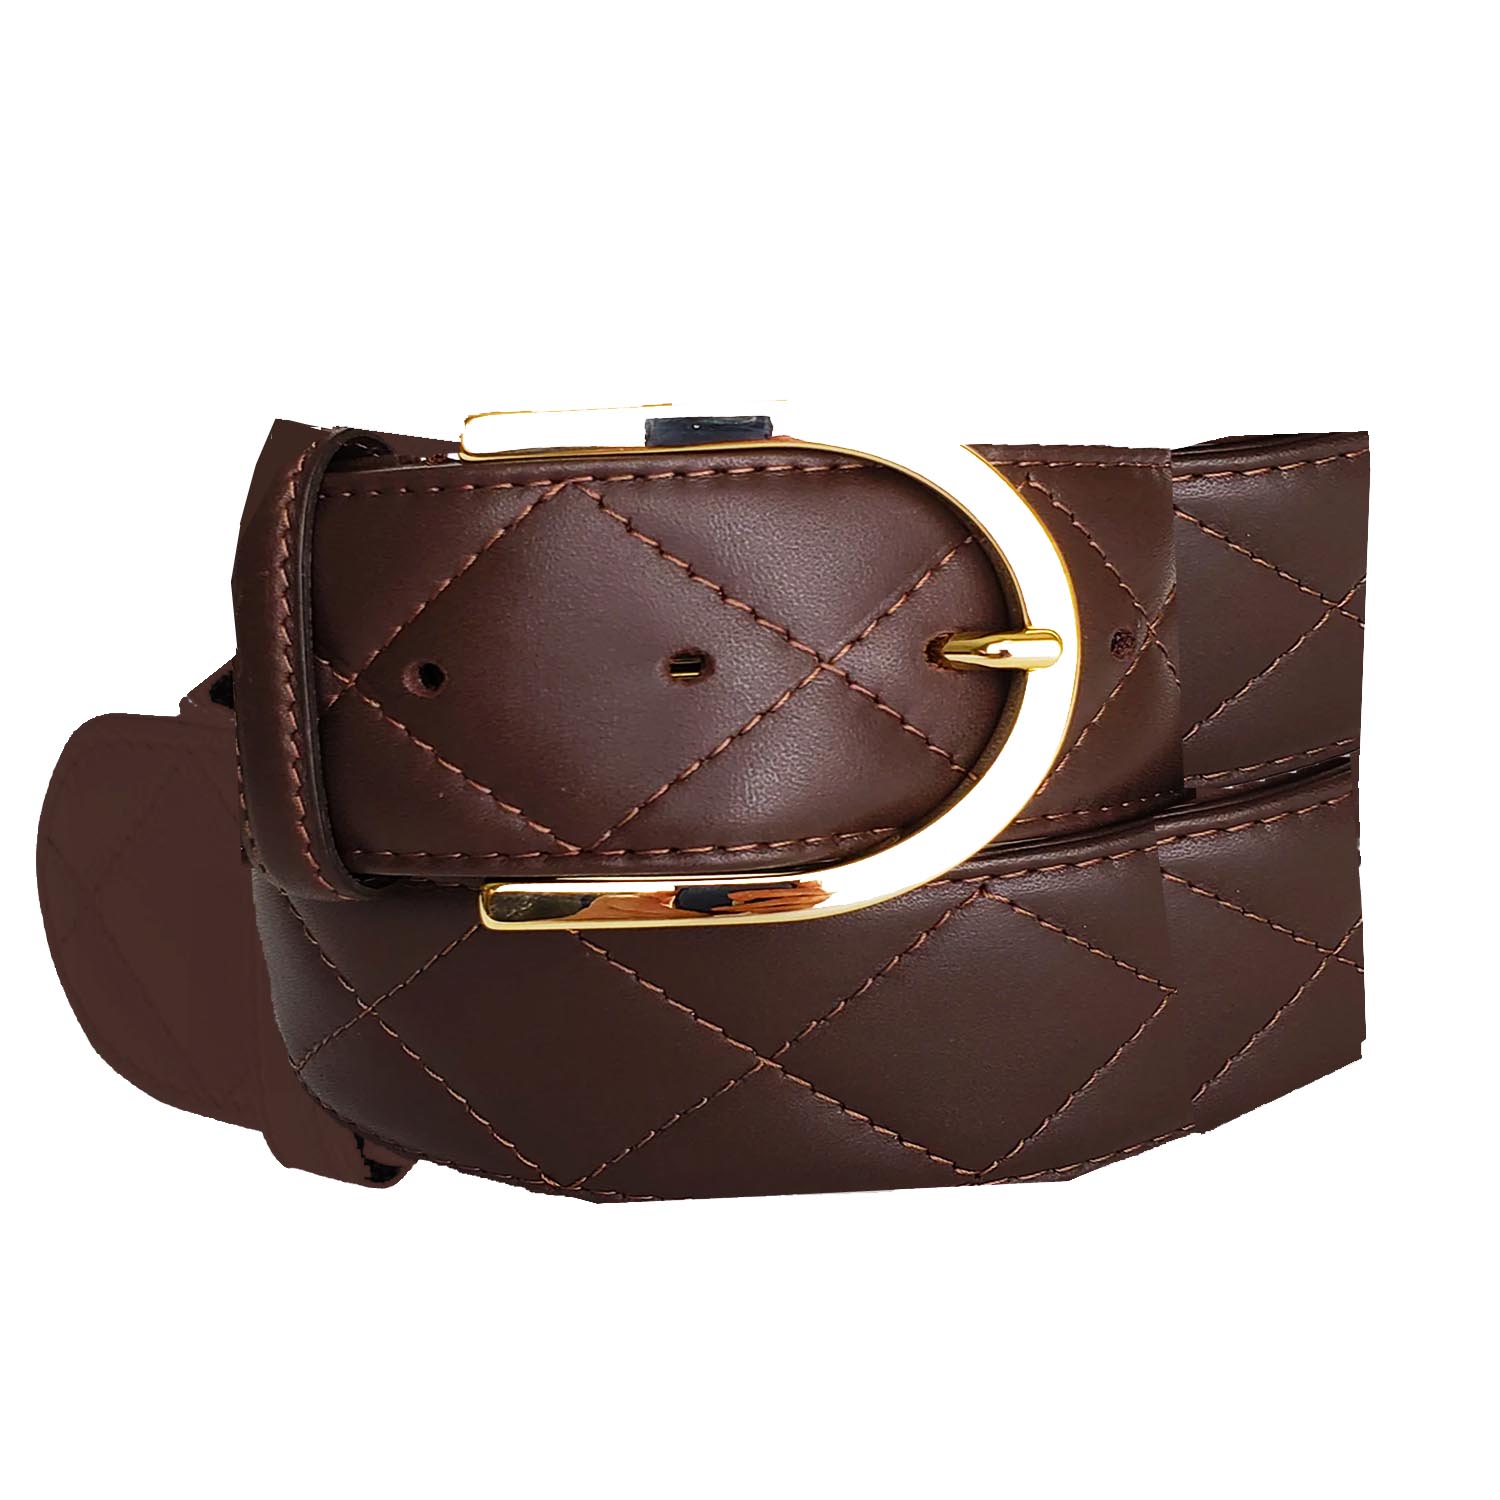 Tailored Sportsman Leather Quilted C Belt